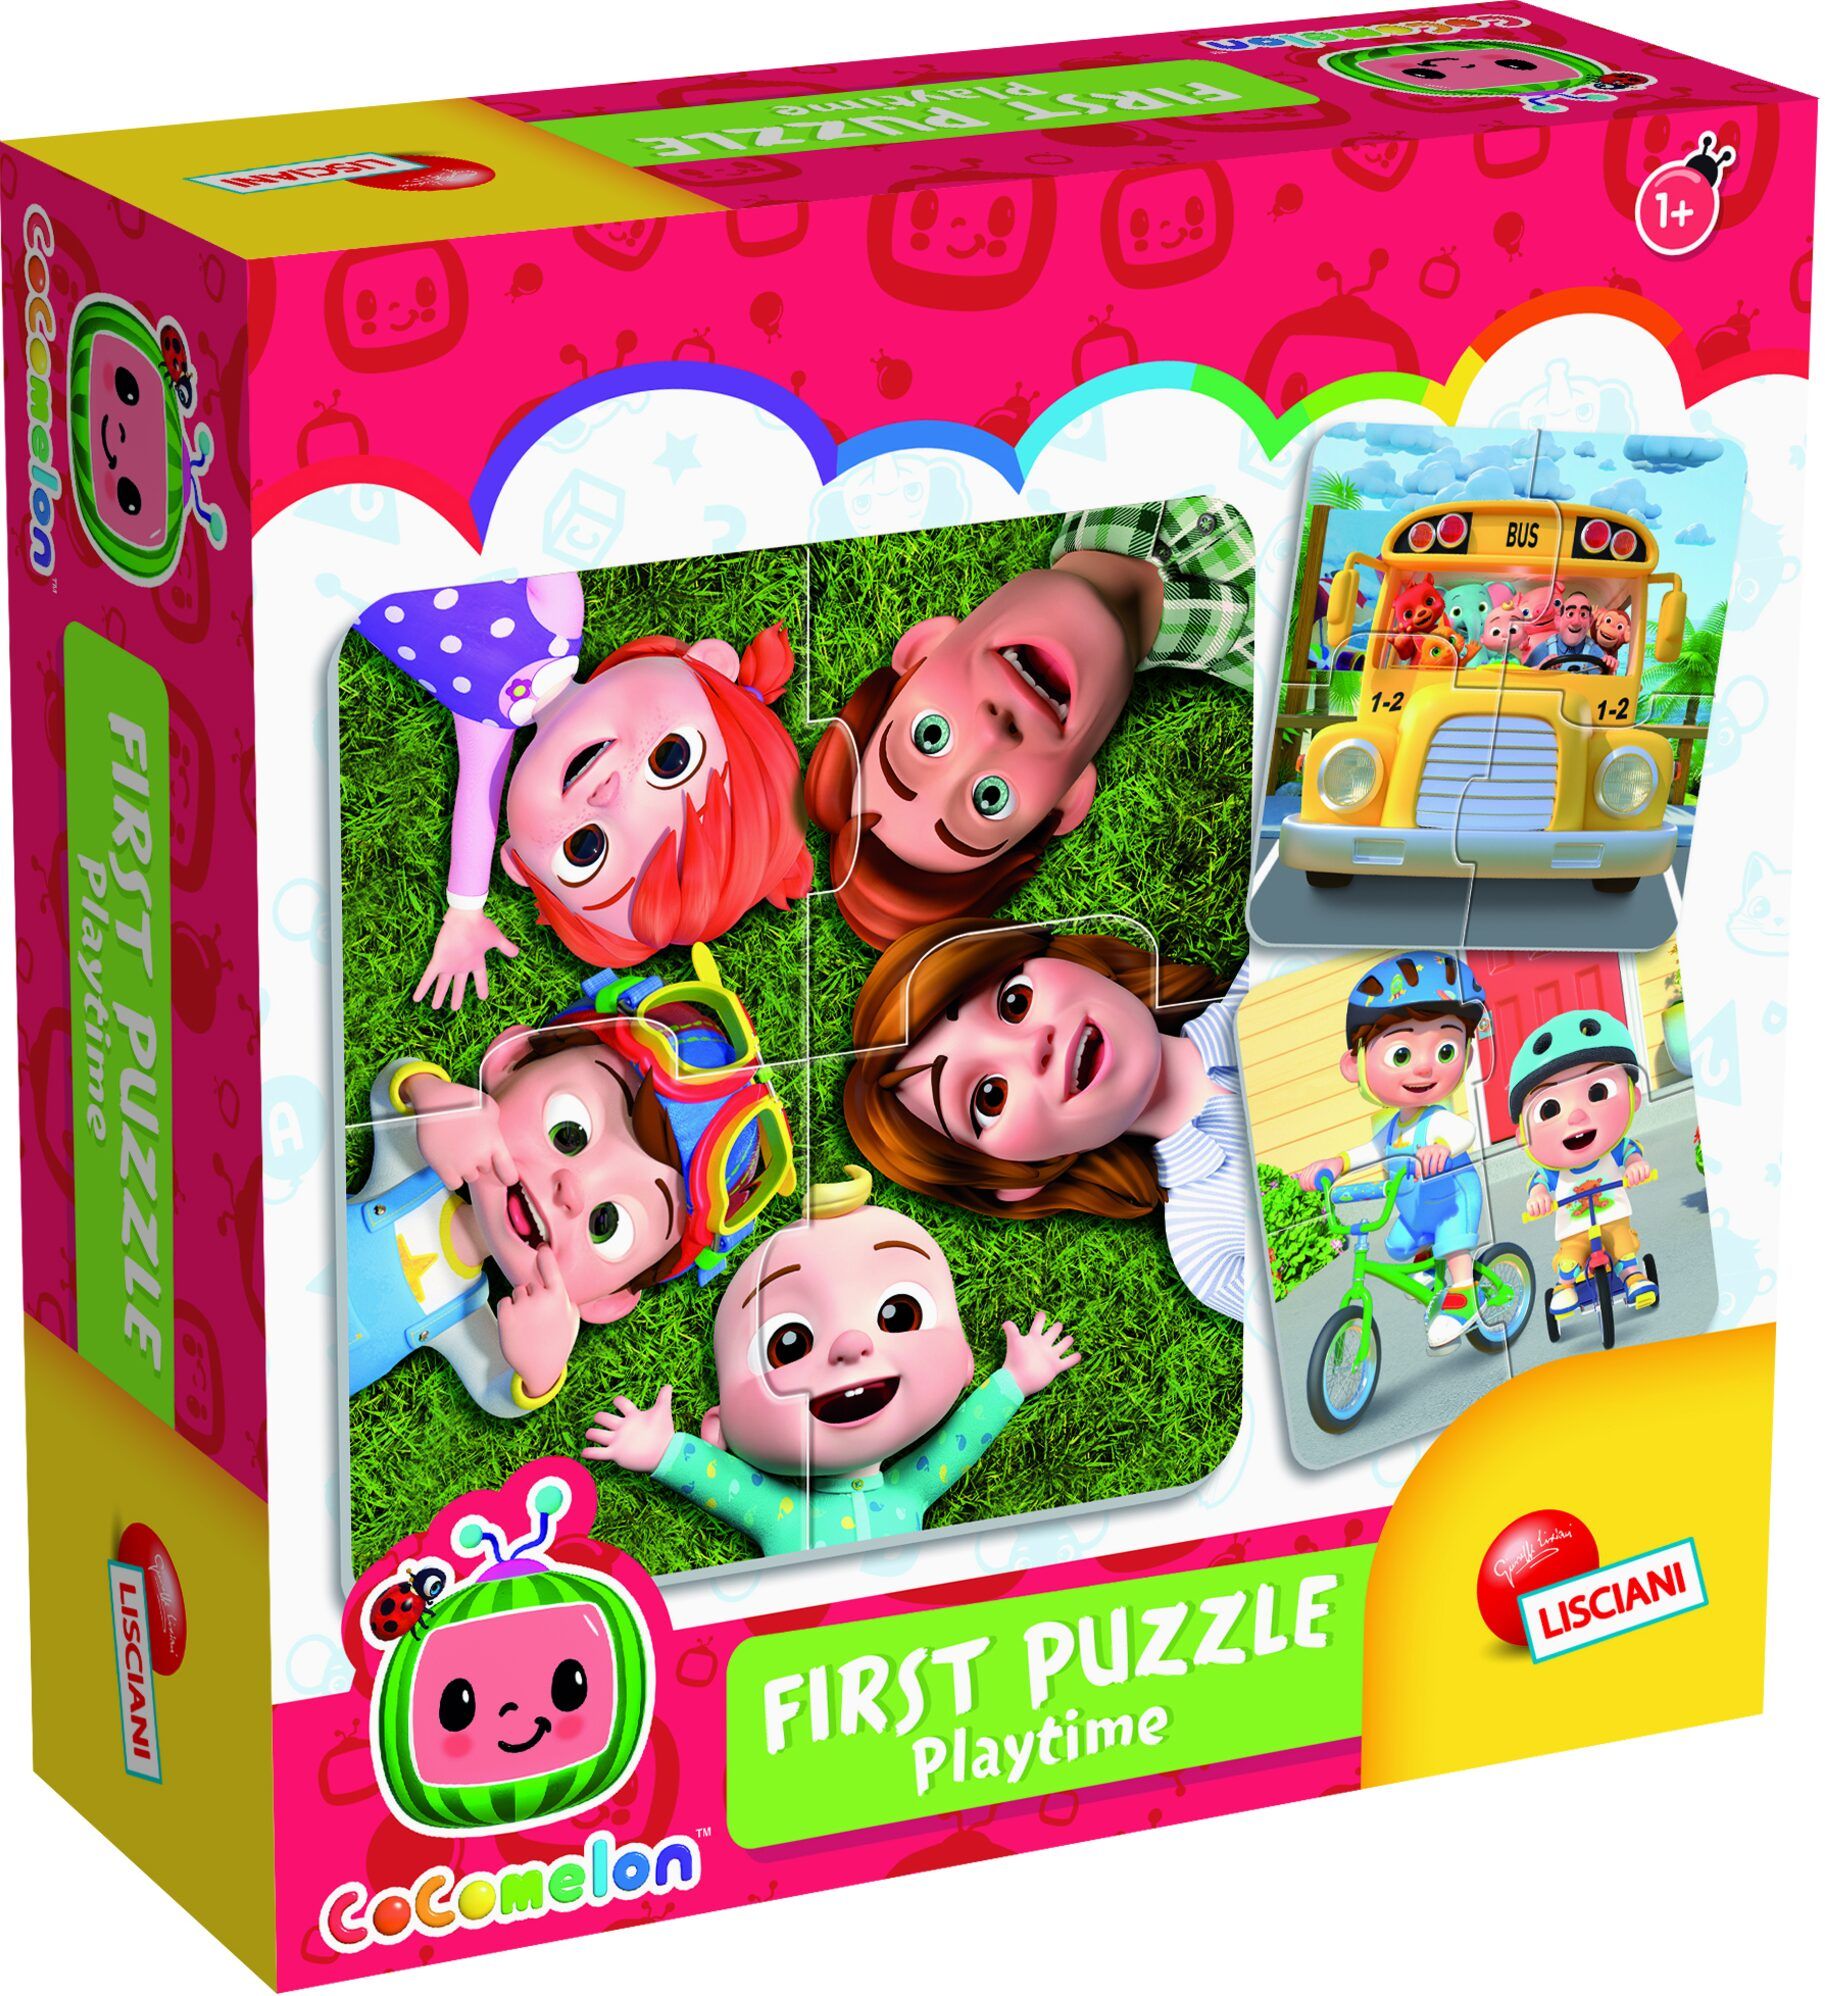 Cocomelon First Puzzle Playtime / Mitt första pussel